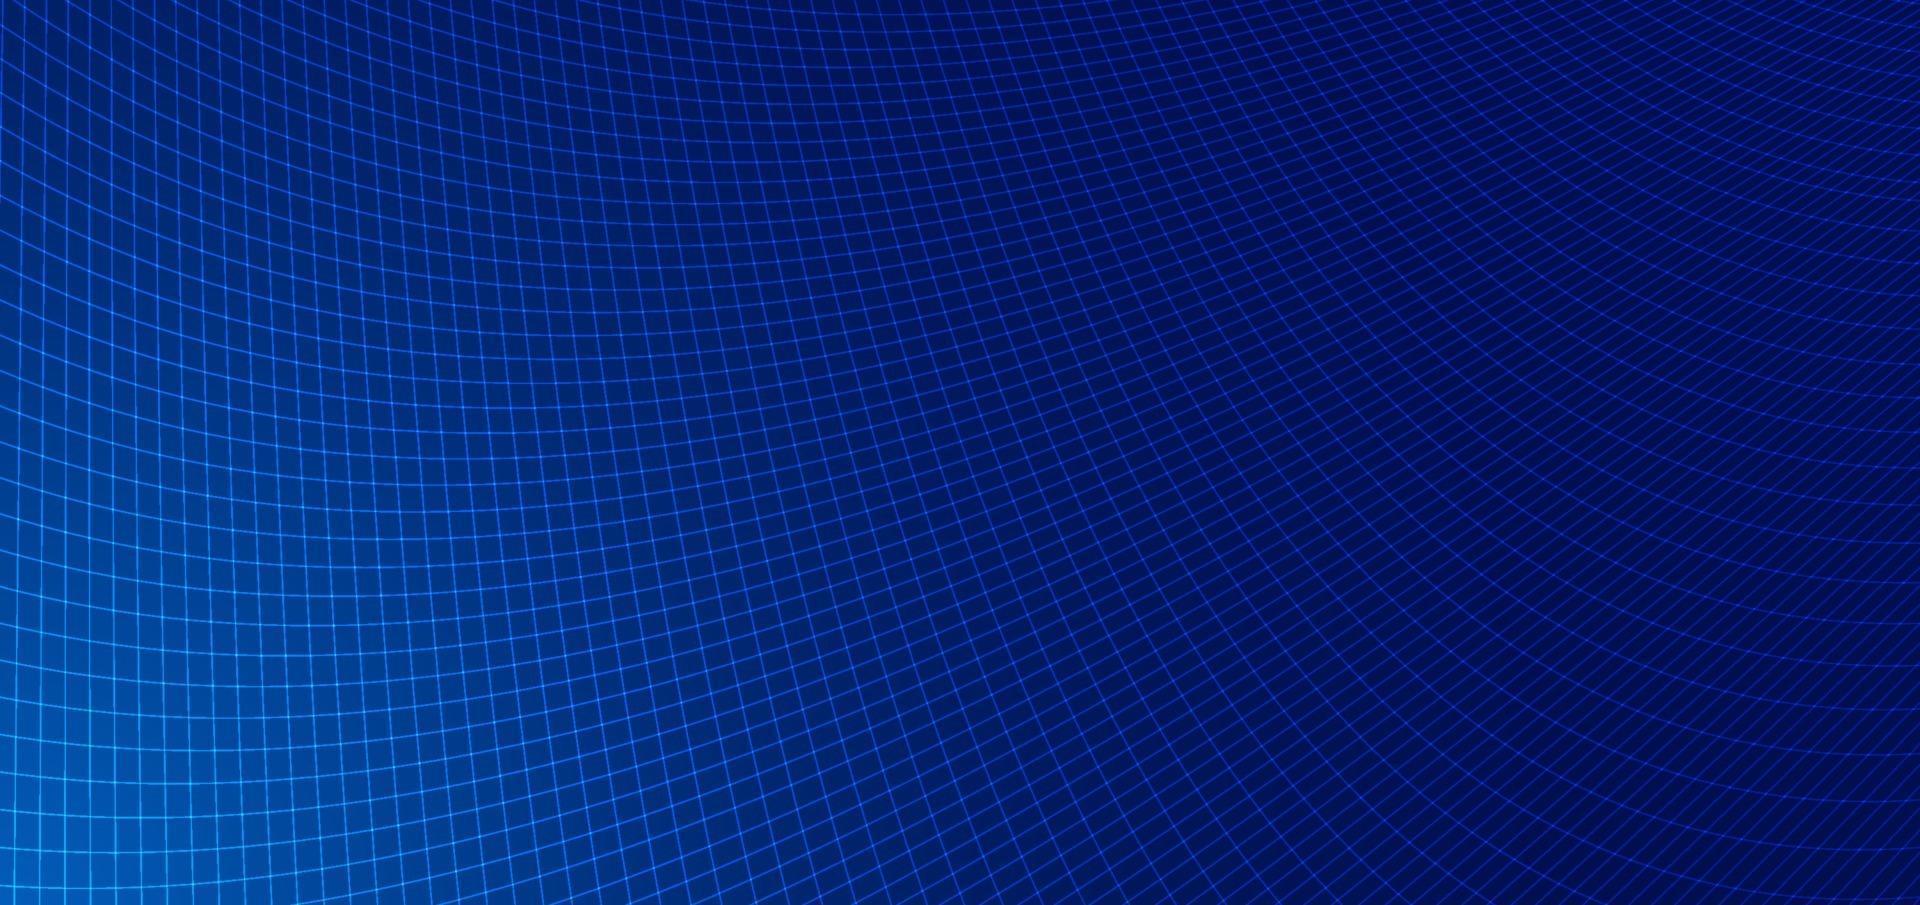 Abstract blue lines grid mesh pattern perspective curved pattern on dark blue background. vector